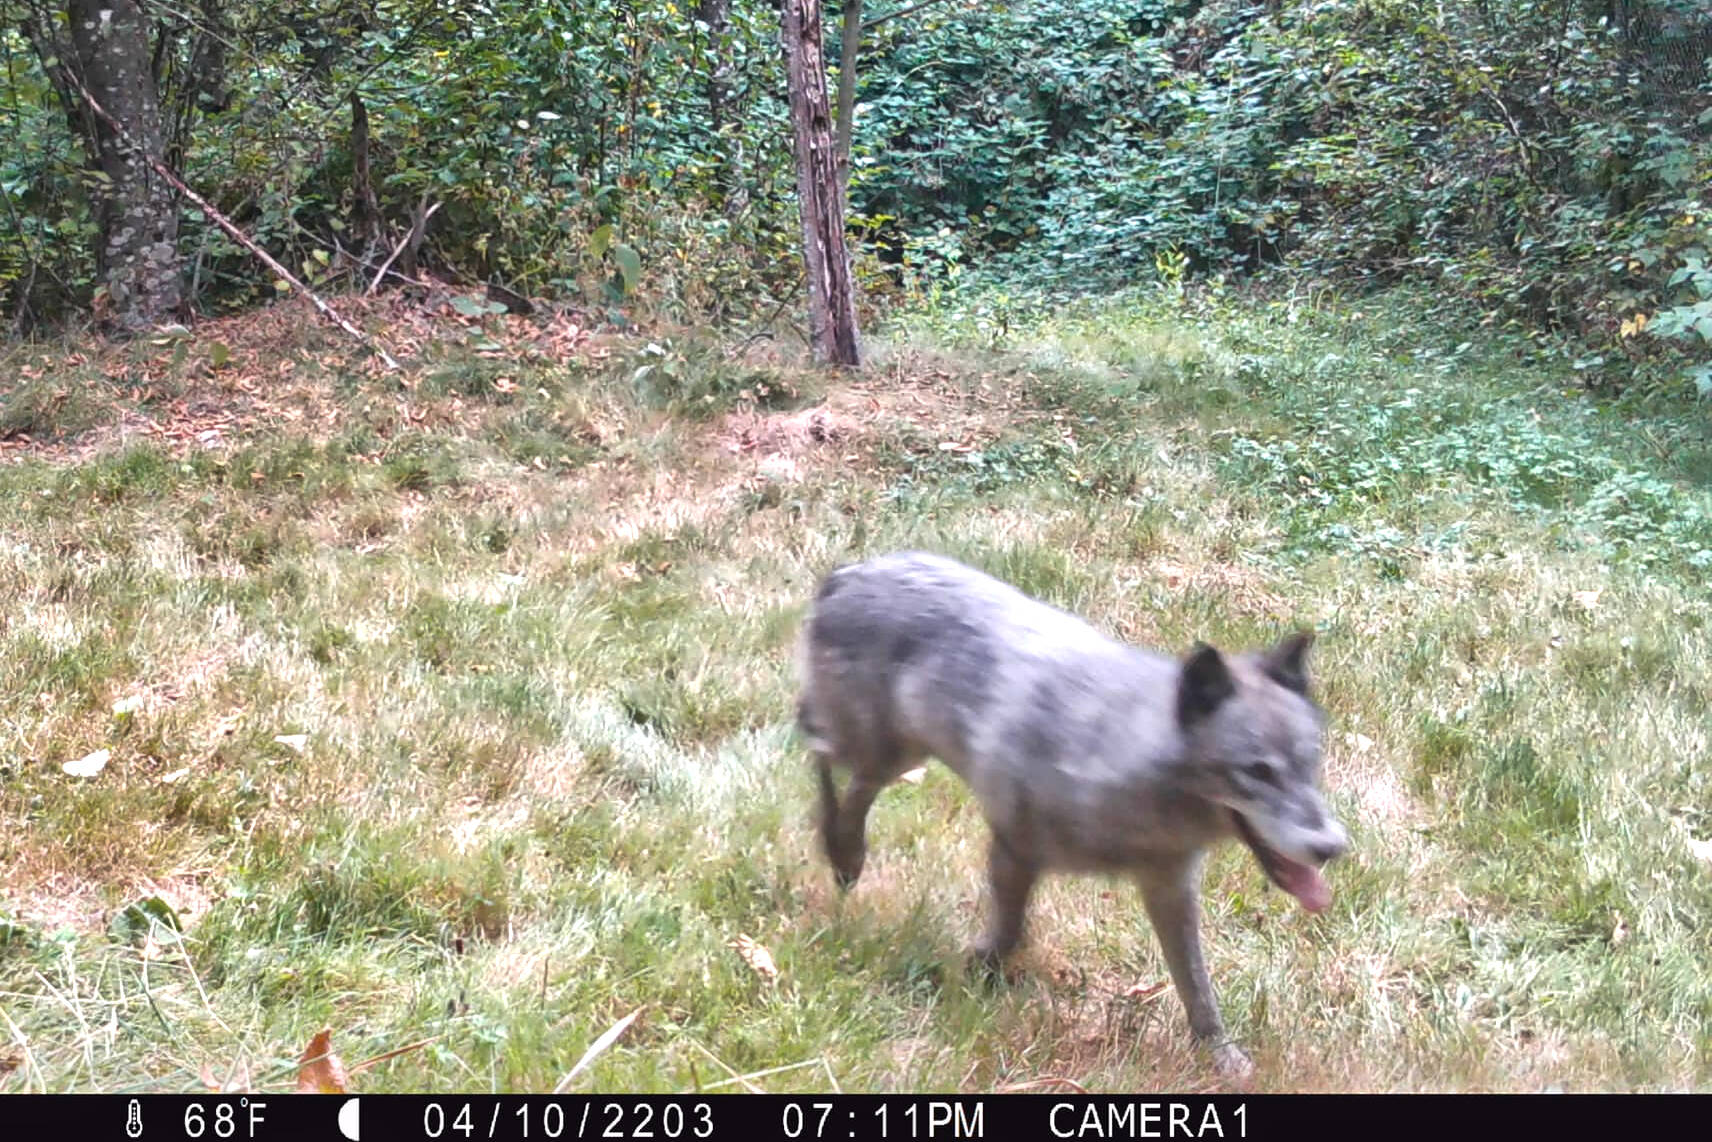 Trail cameras were used to help monitor the movement of Tempest, a wolf at the Greater Vancouver Zoo. (BC Trappers Association)